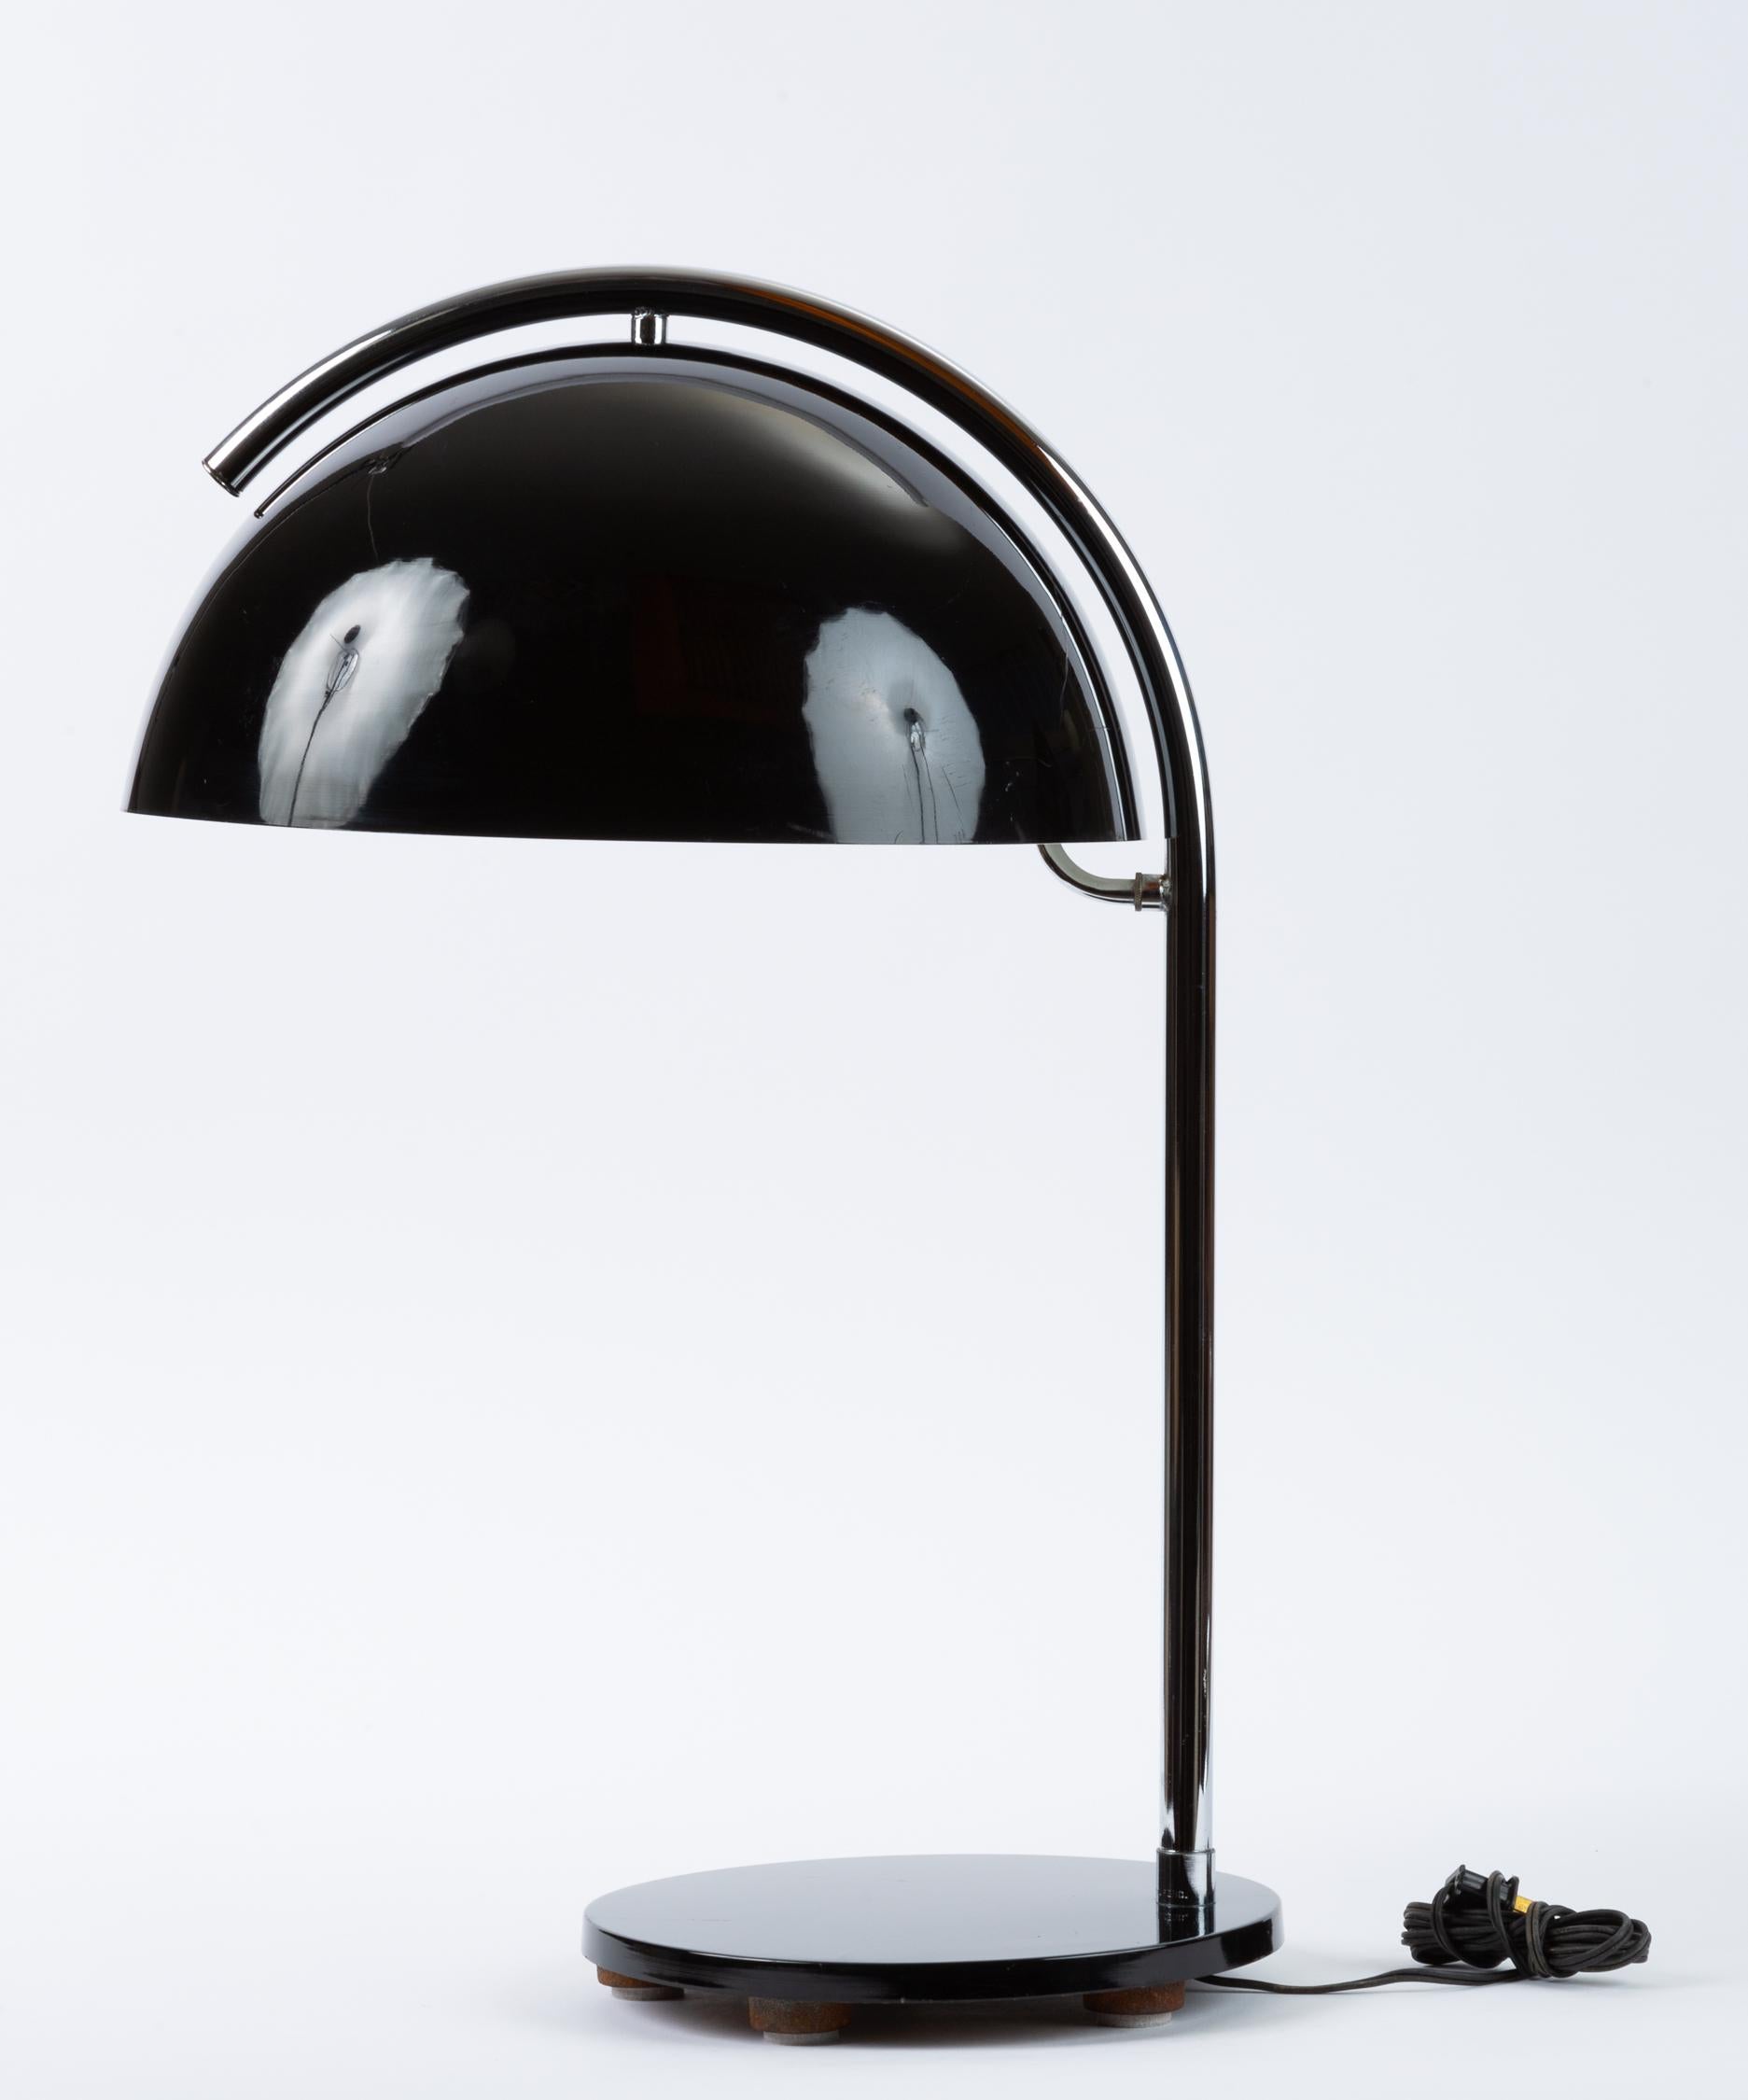 A tall table lamp with an arcing steel arm and a generous mushroom lampshade in black-enameled metal. A round base in matching black anchors the lamp, concealing a stabilizing weighted iron foot. A curved steel branch reaches from the arm beneath